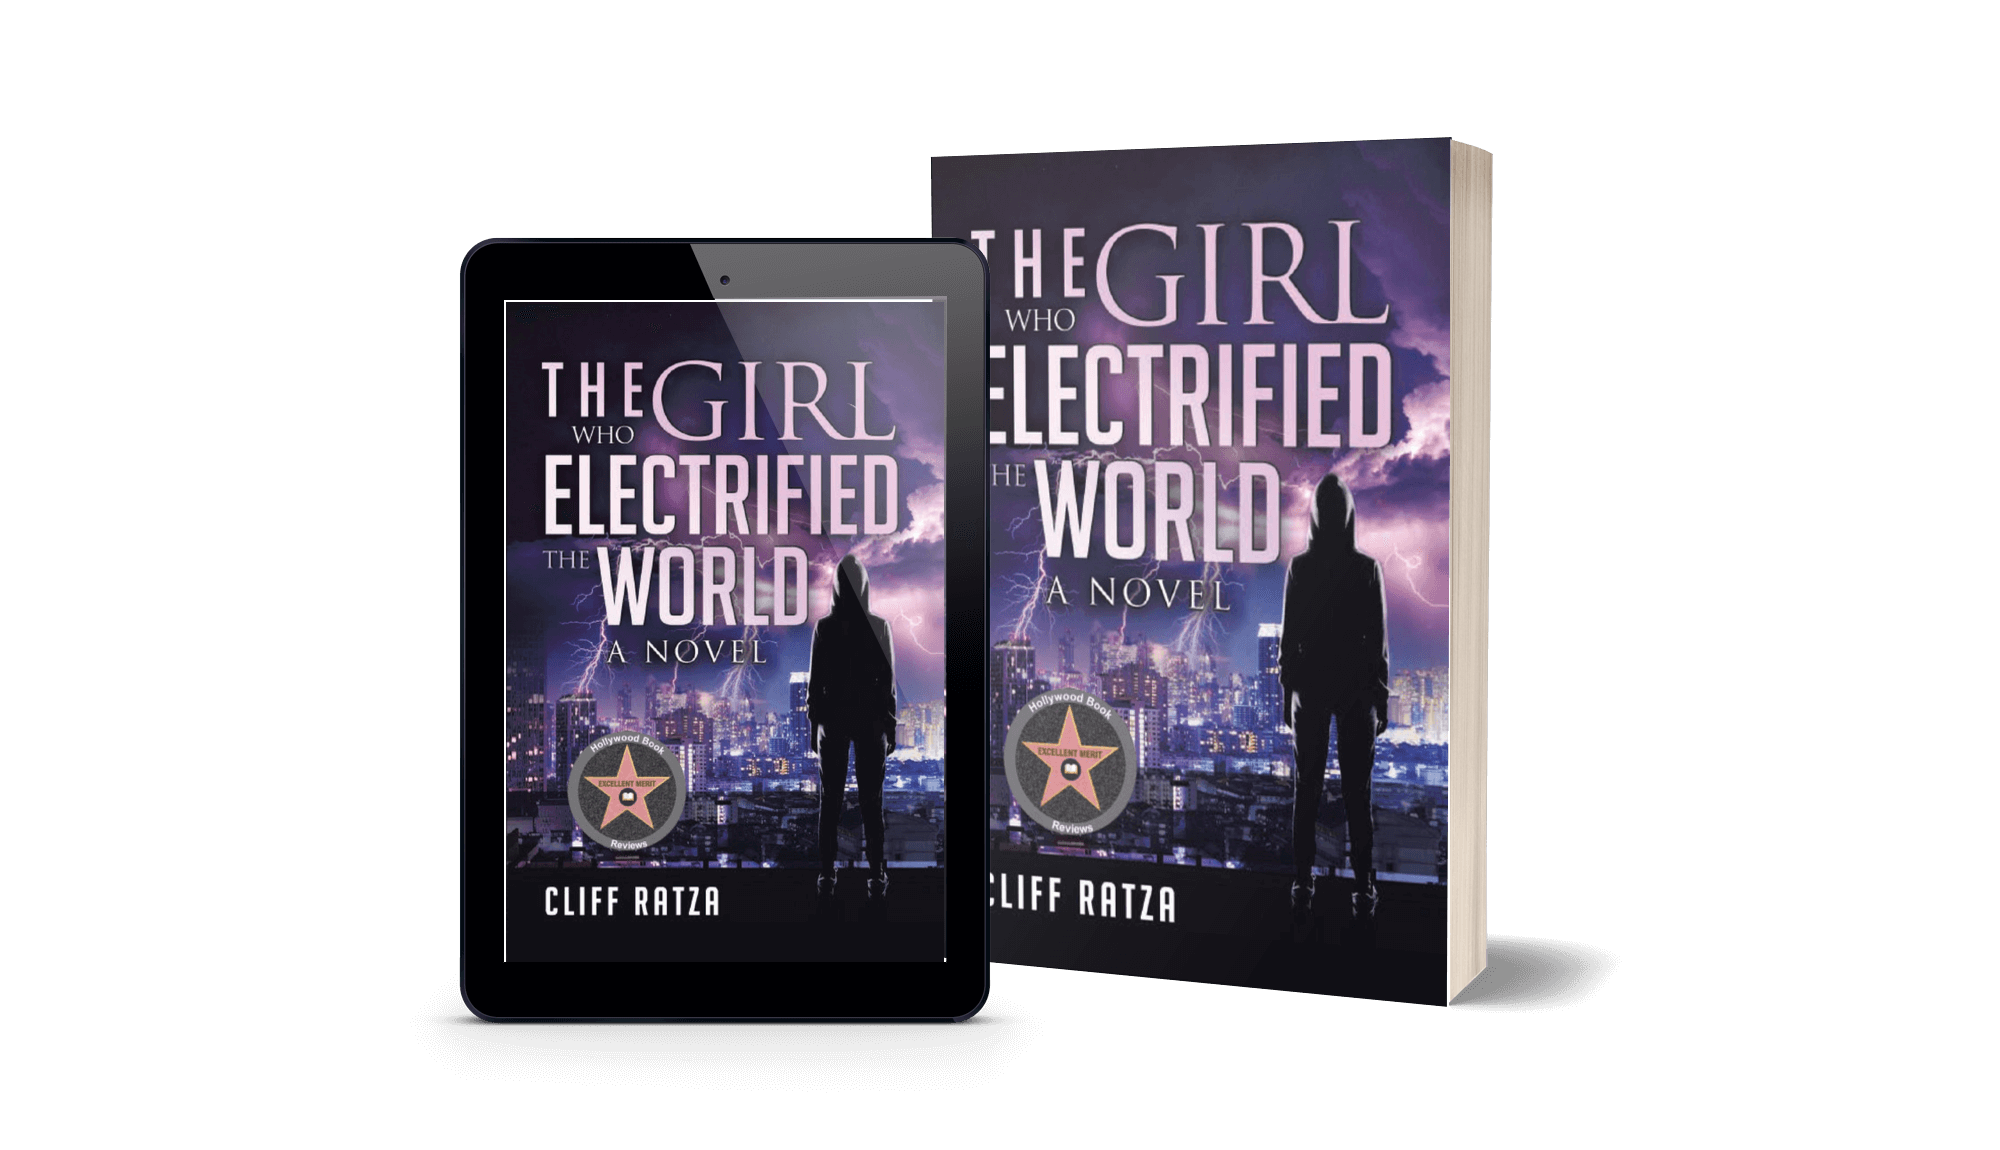 Novel called The Girl Who Electrified the World beside its digital version